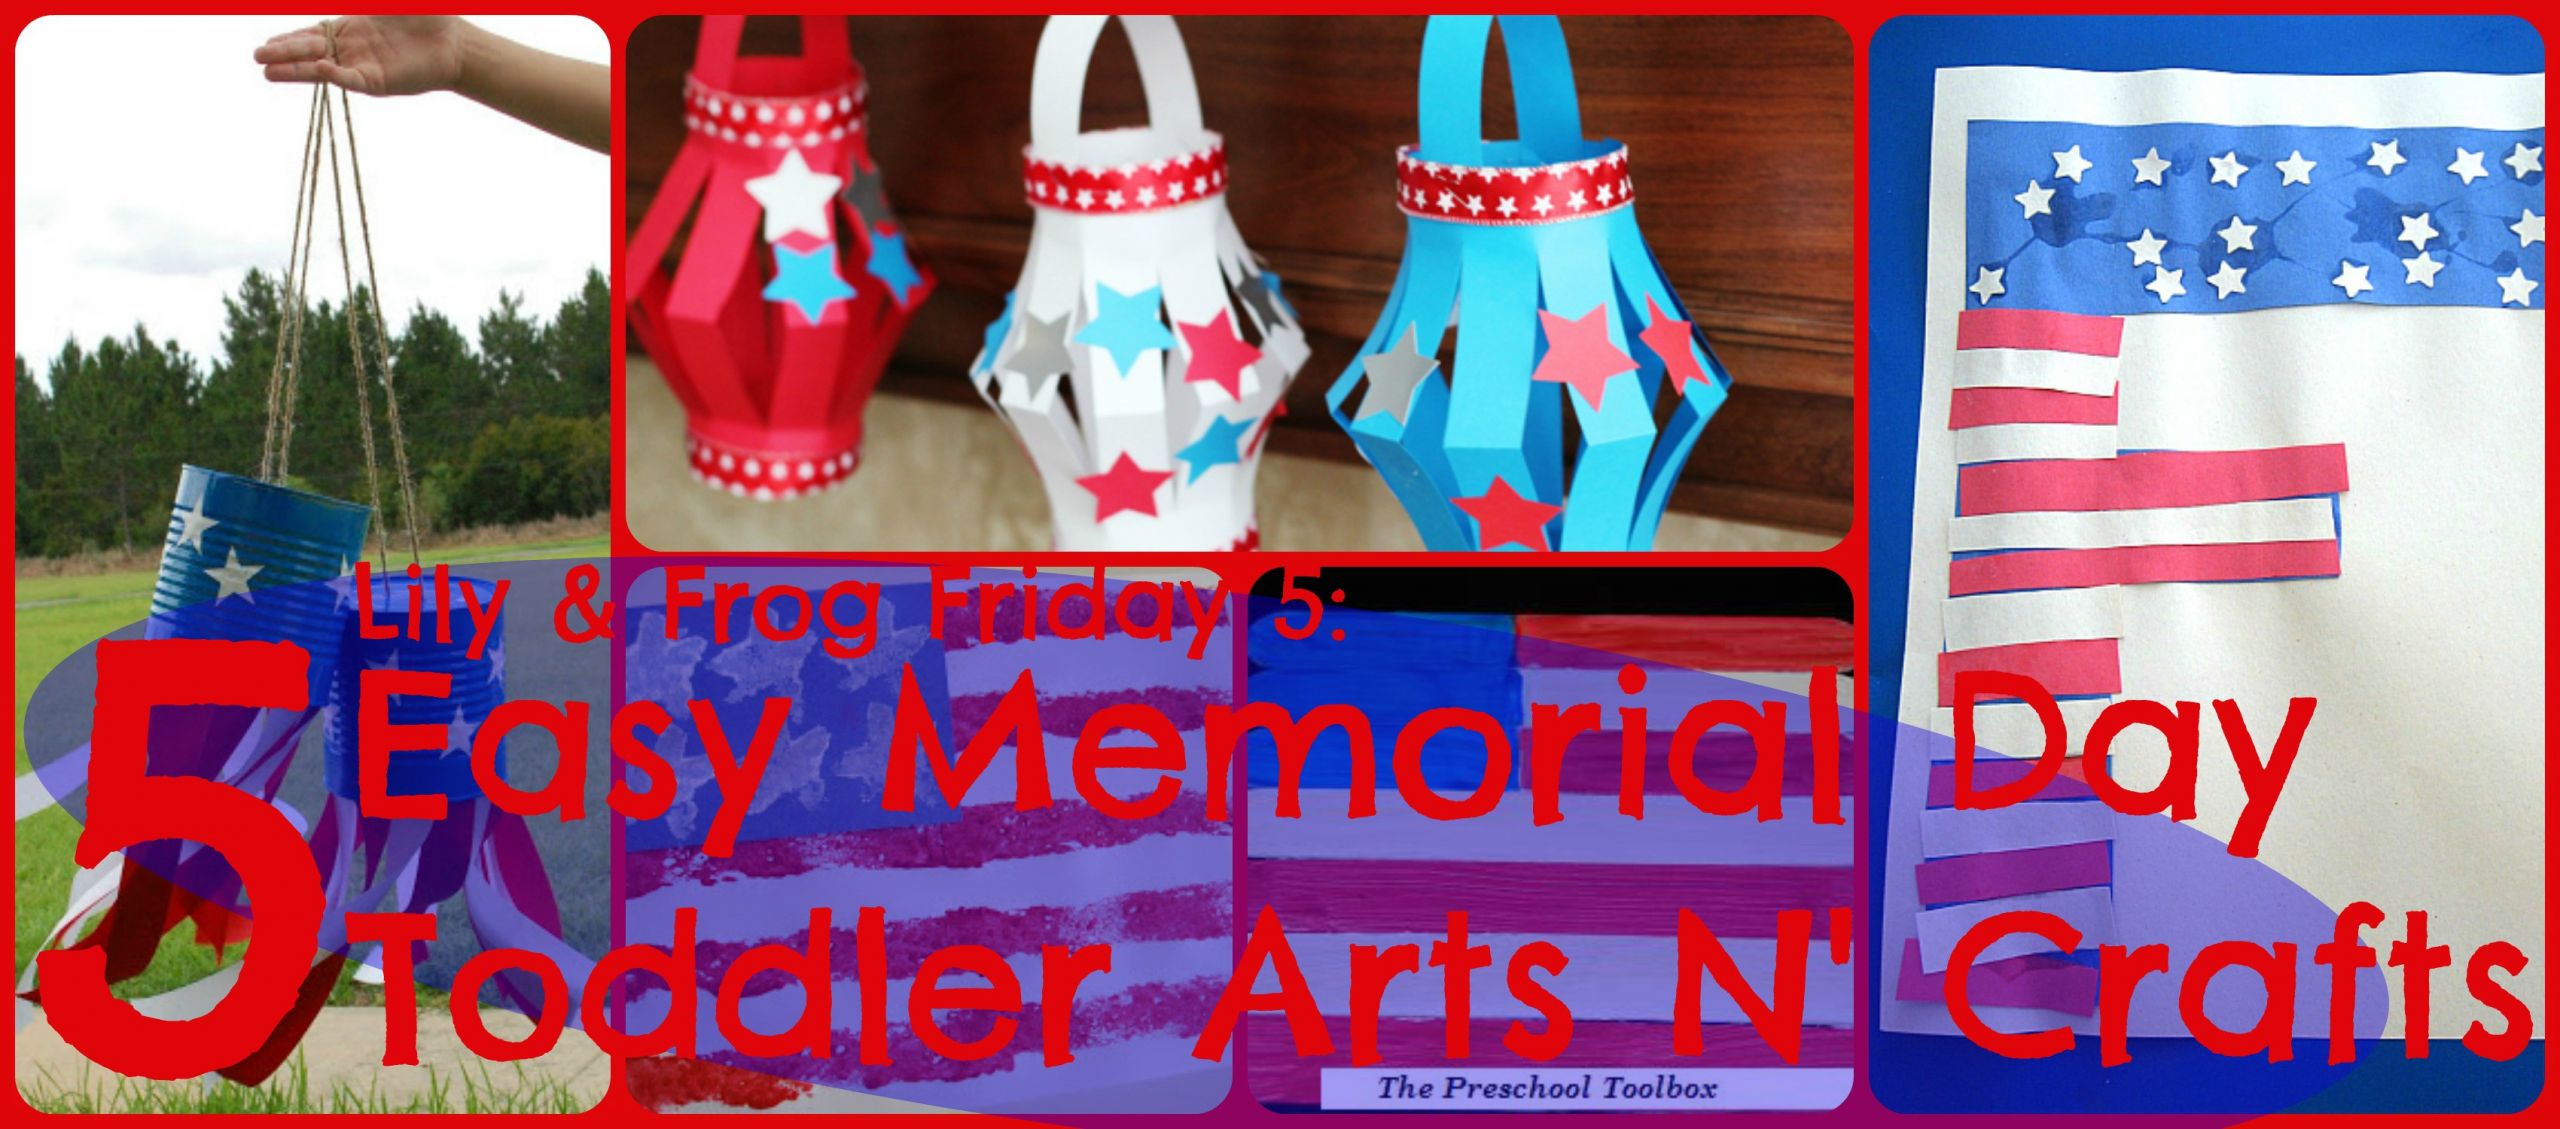 Easy Memorial Day Crafts
 Lily & Frog Friday 5 5 Easy Memorial Day Toddler Arts N